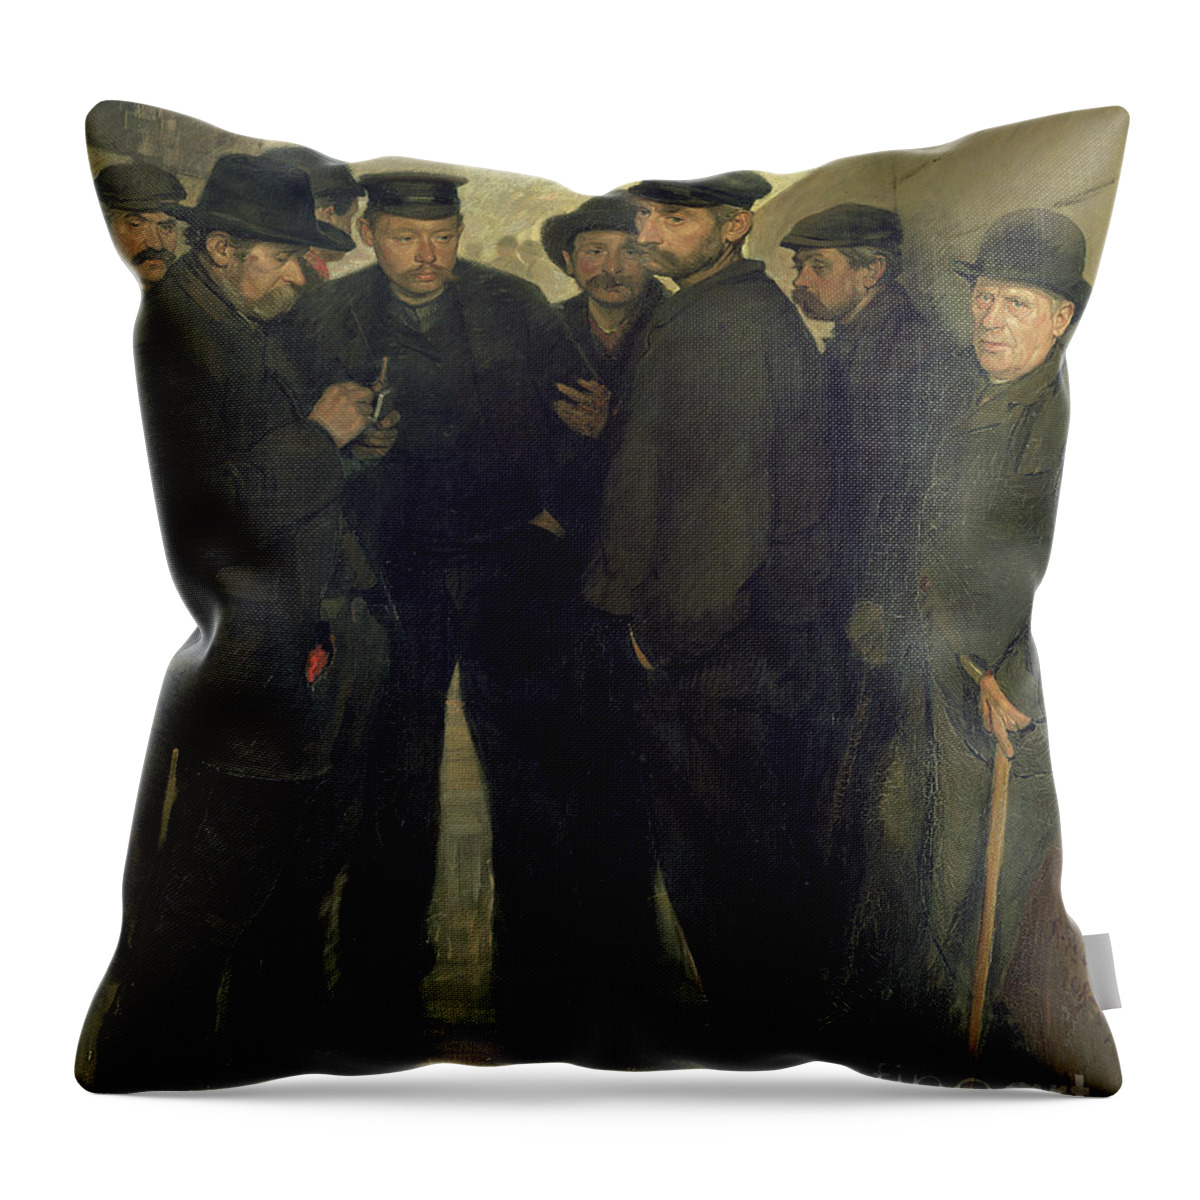 19th Century Throw Pillow featuring the painting The Unemployed, C.1908-9 by Rudolf Jacob Zoller